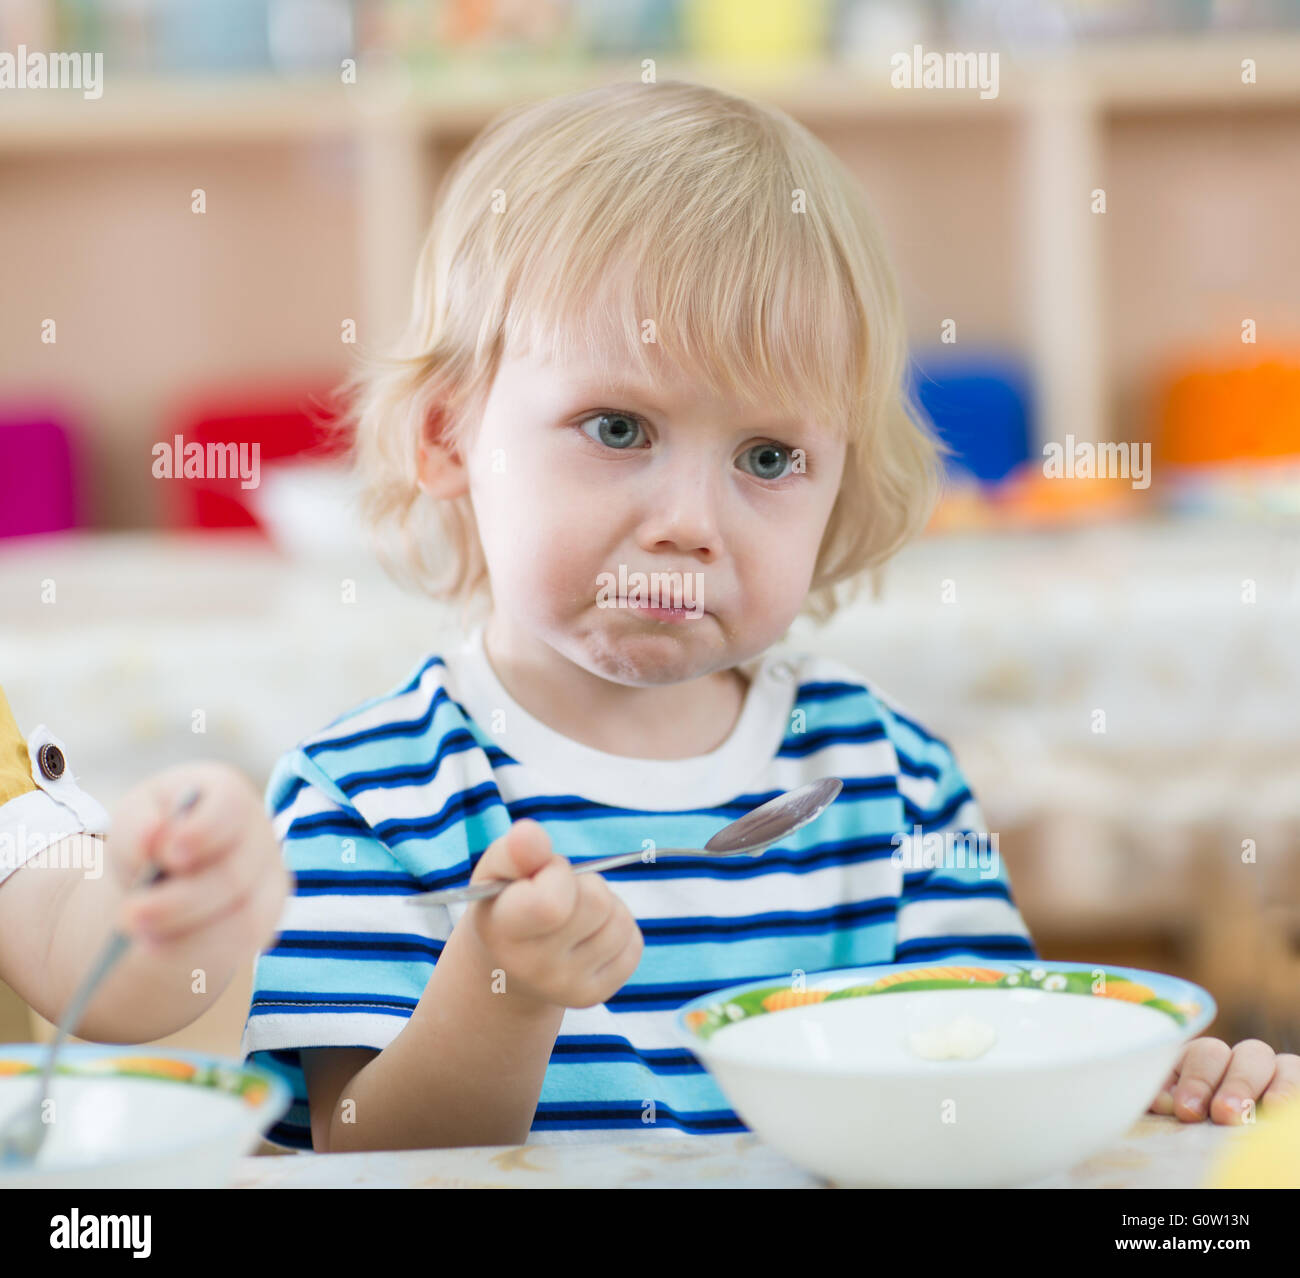 serious kid eating from plates in kindergarten Stock Photo